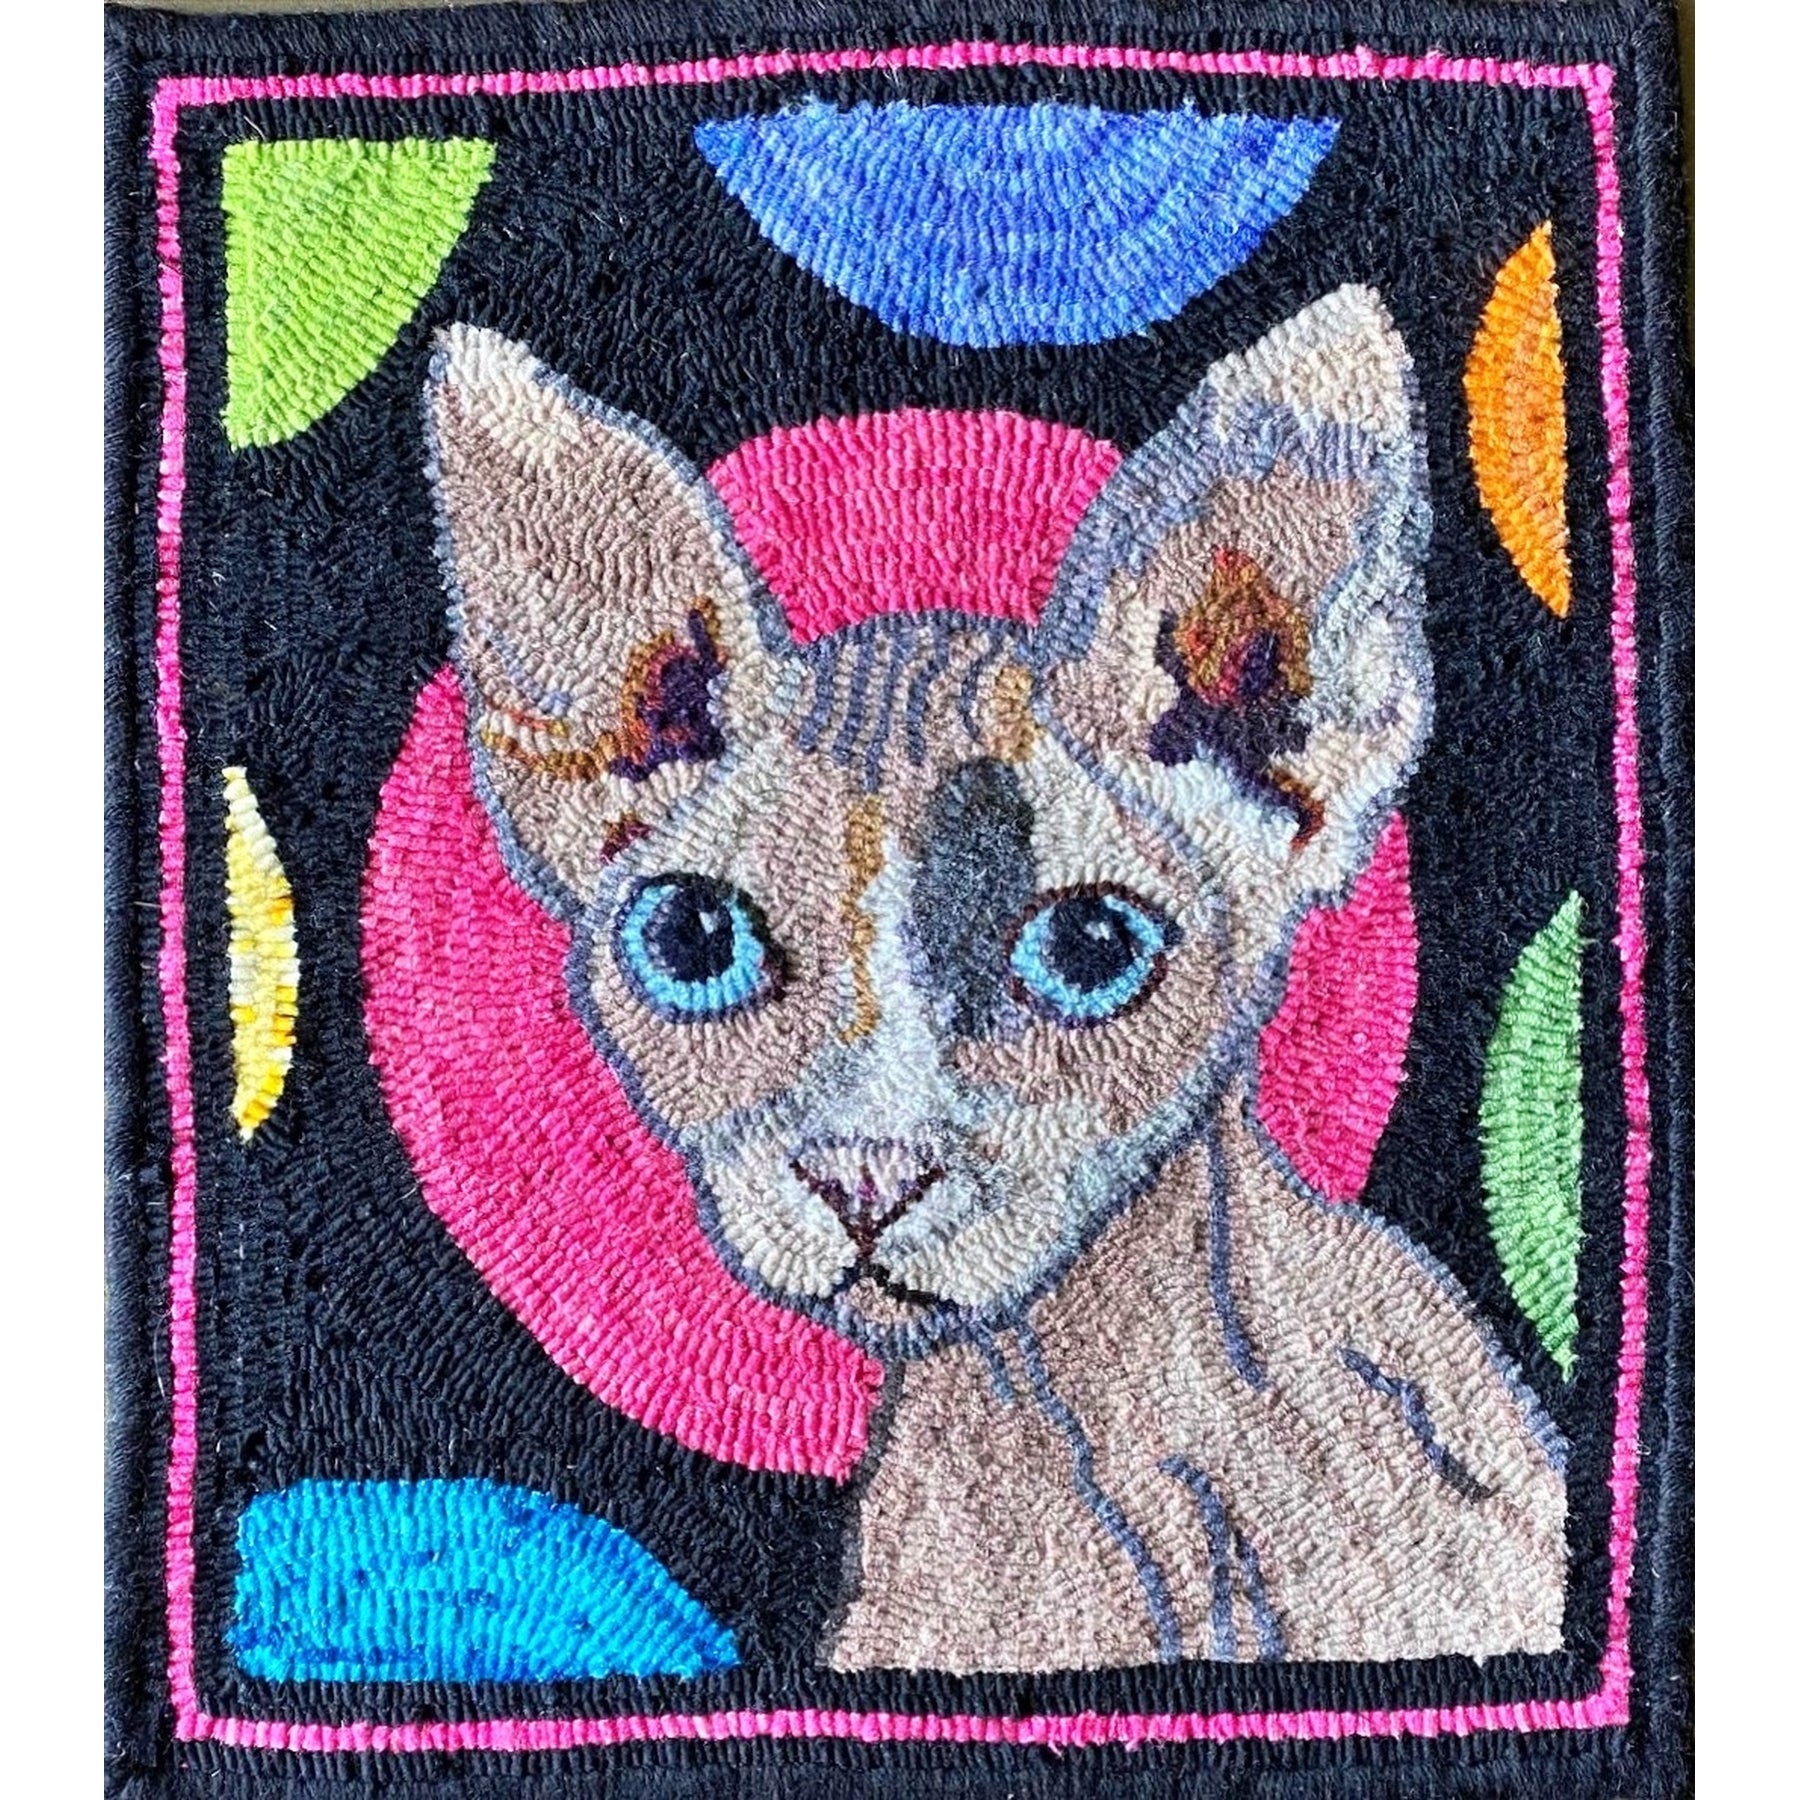 Cat, rug hooked by Kathryn Powell